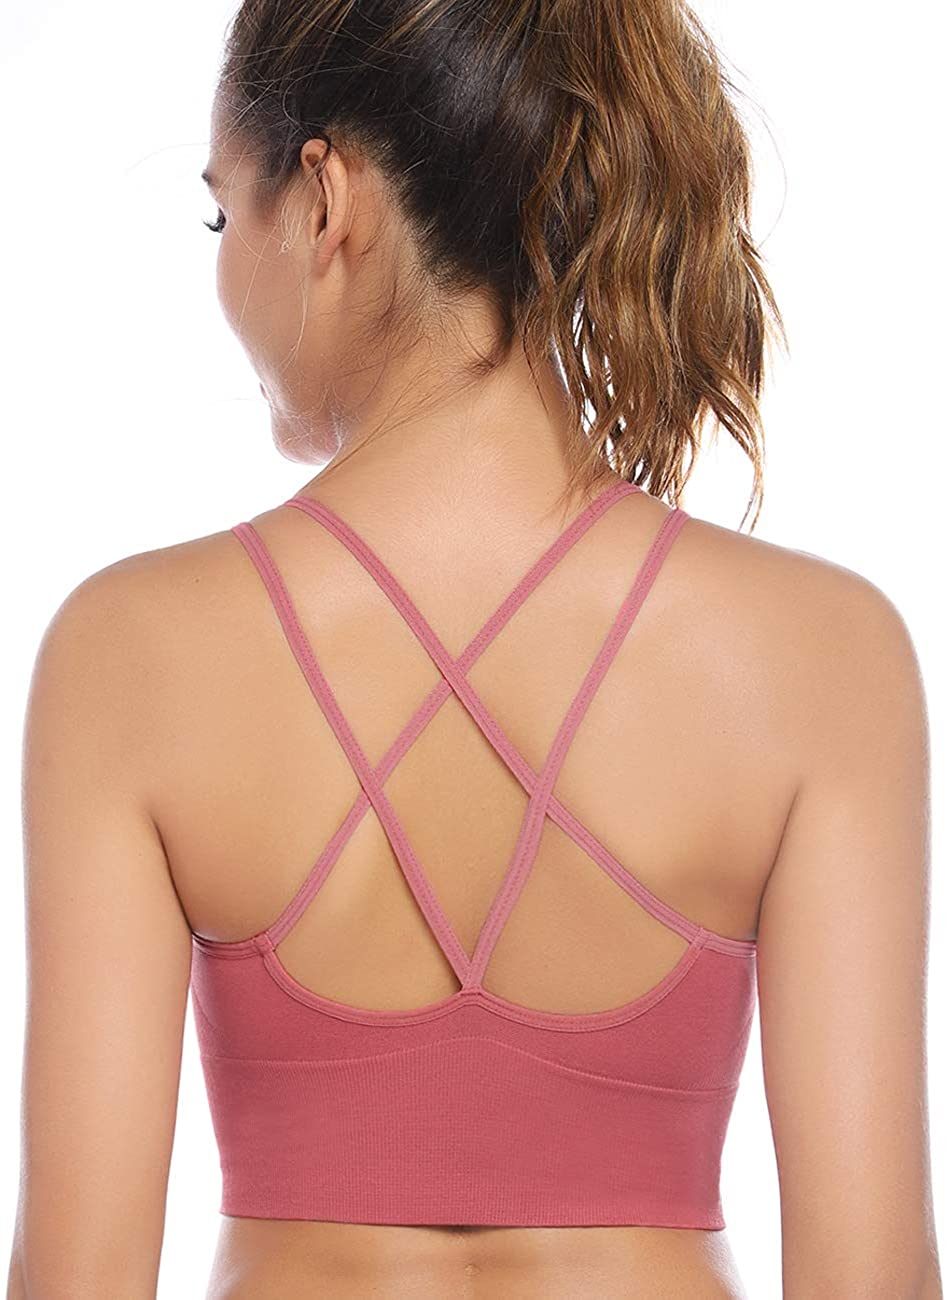 Sykooria 3 Pack Strappy Sports Bra for Women Sexy Crisscross for